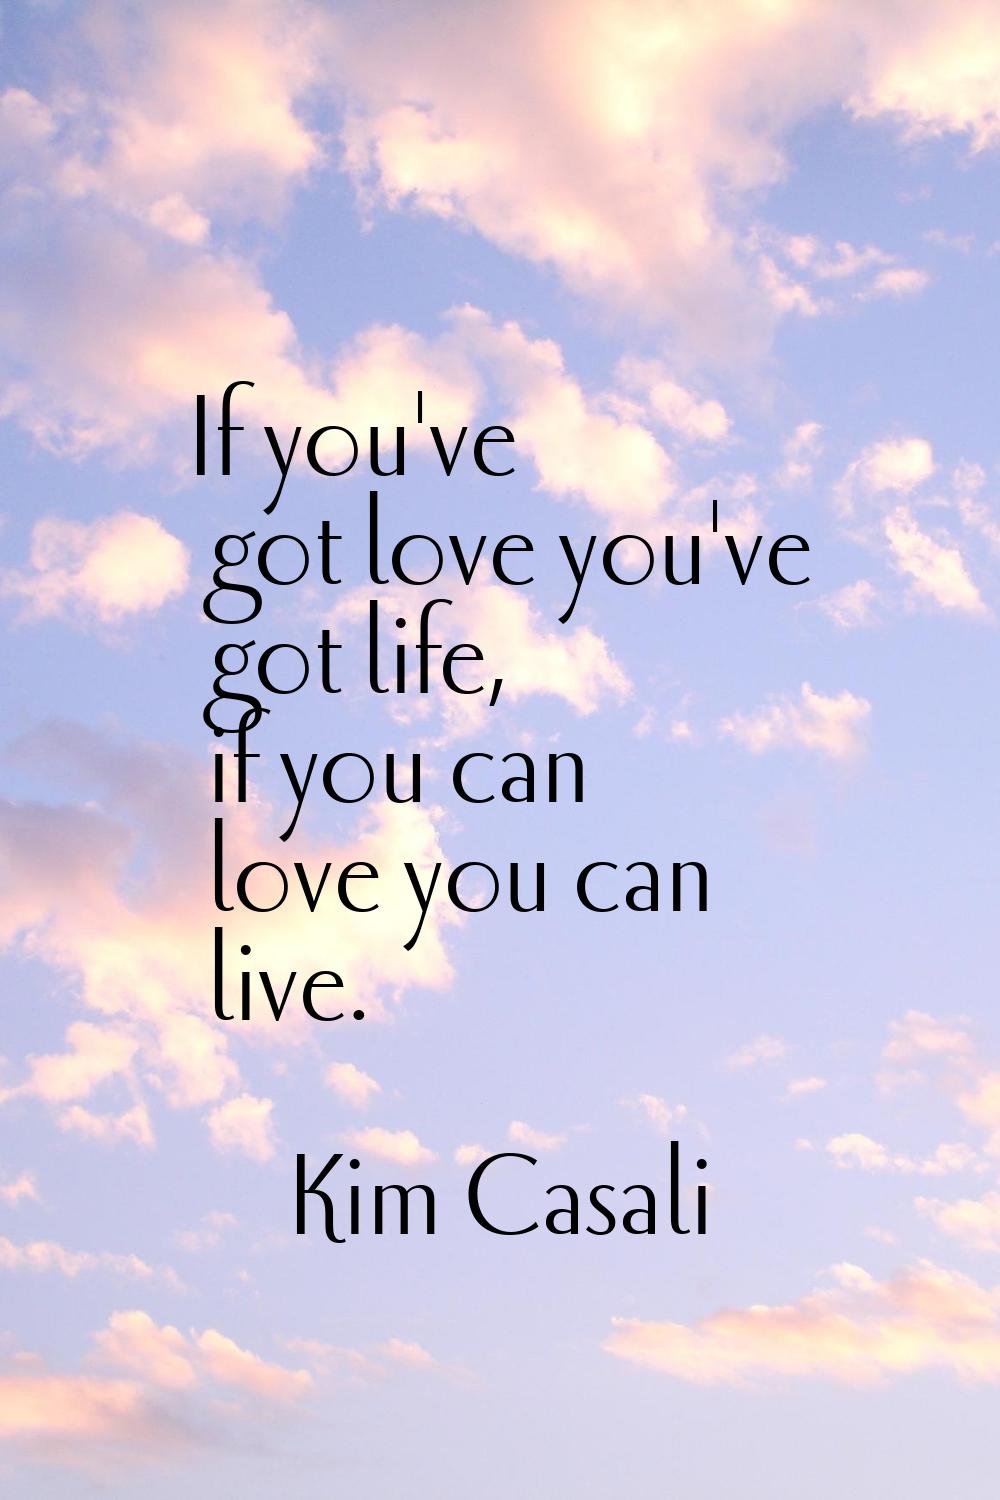 If you've got love you've got life, if you can love you can live.